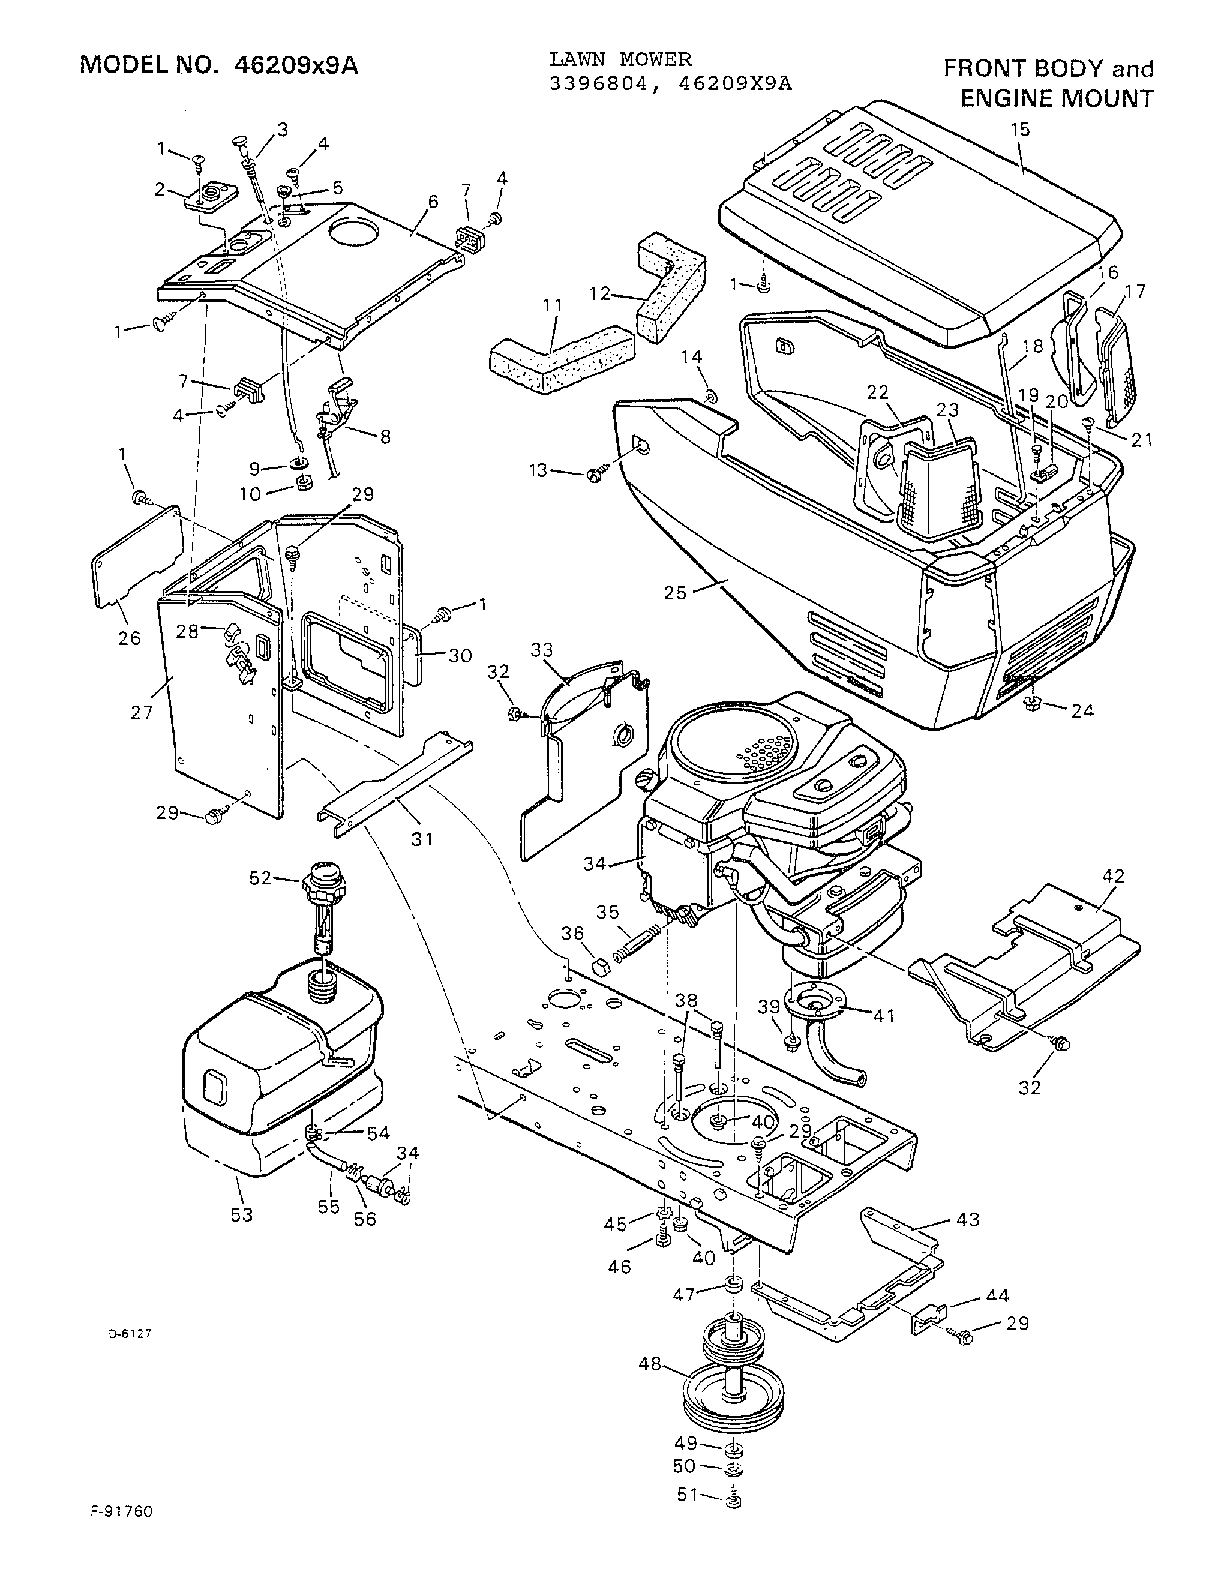 Murray Lawn Mower Parts